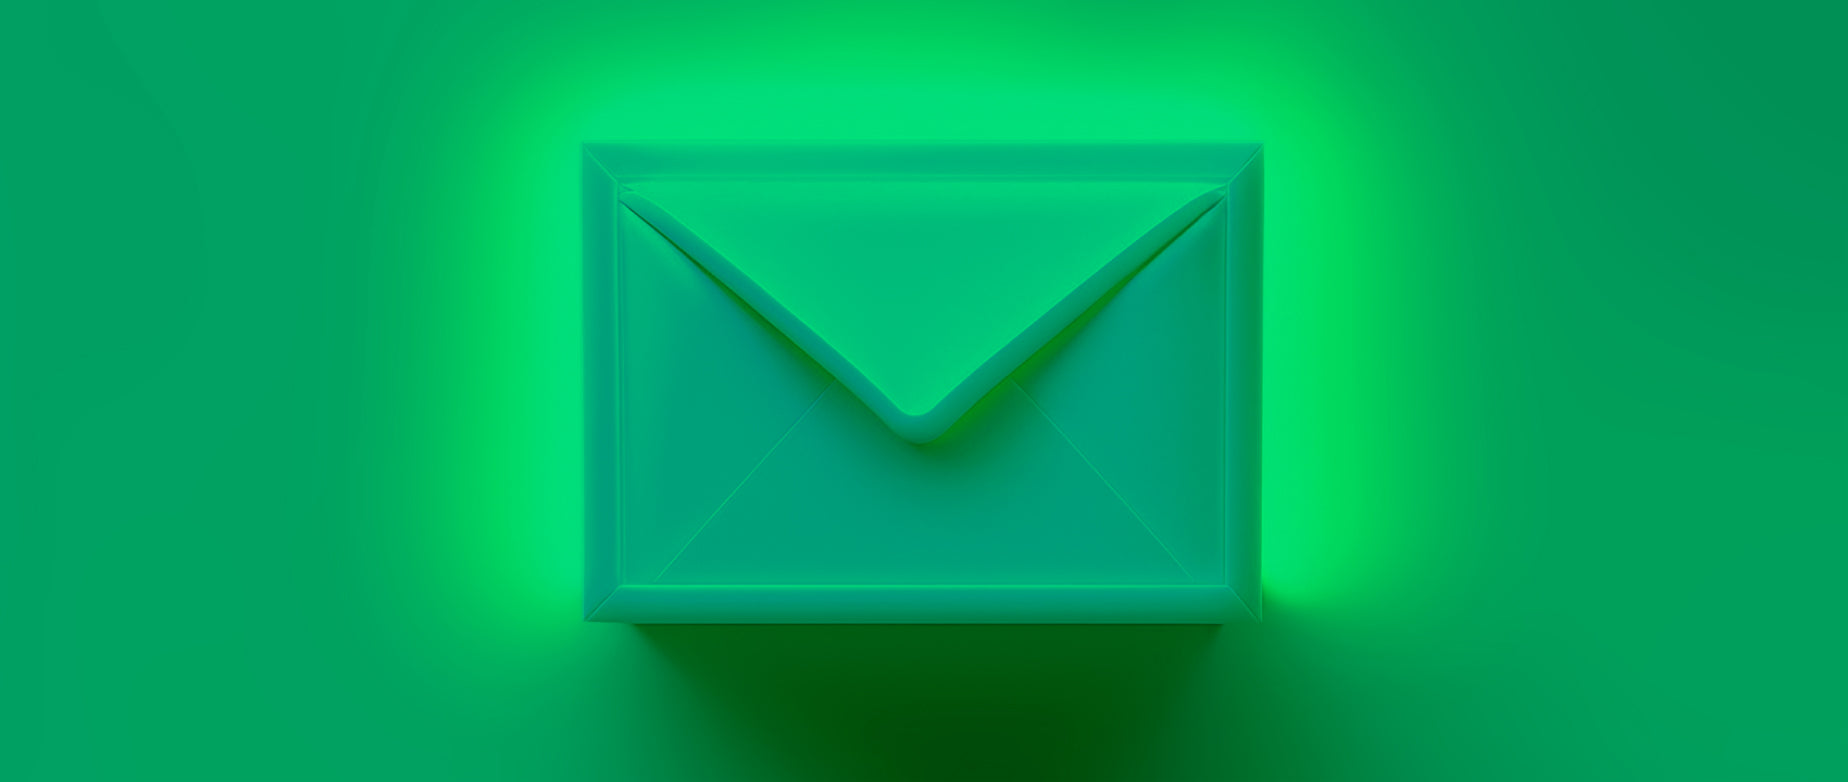 Icon of an email app against a green background